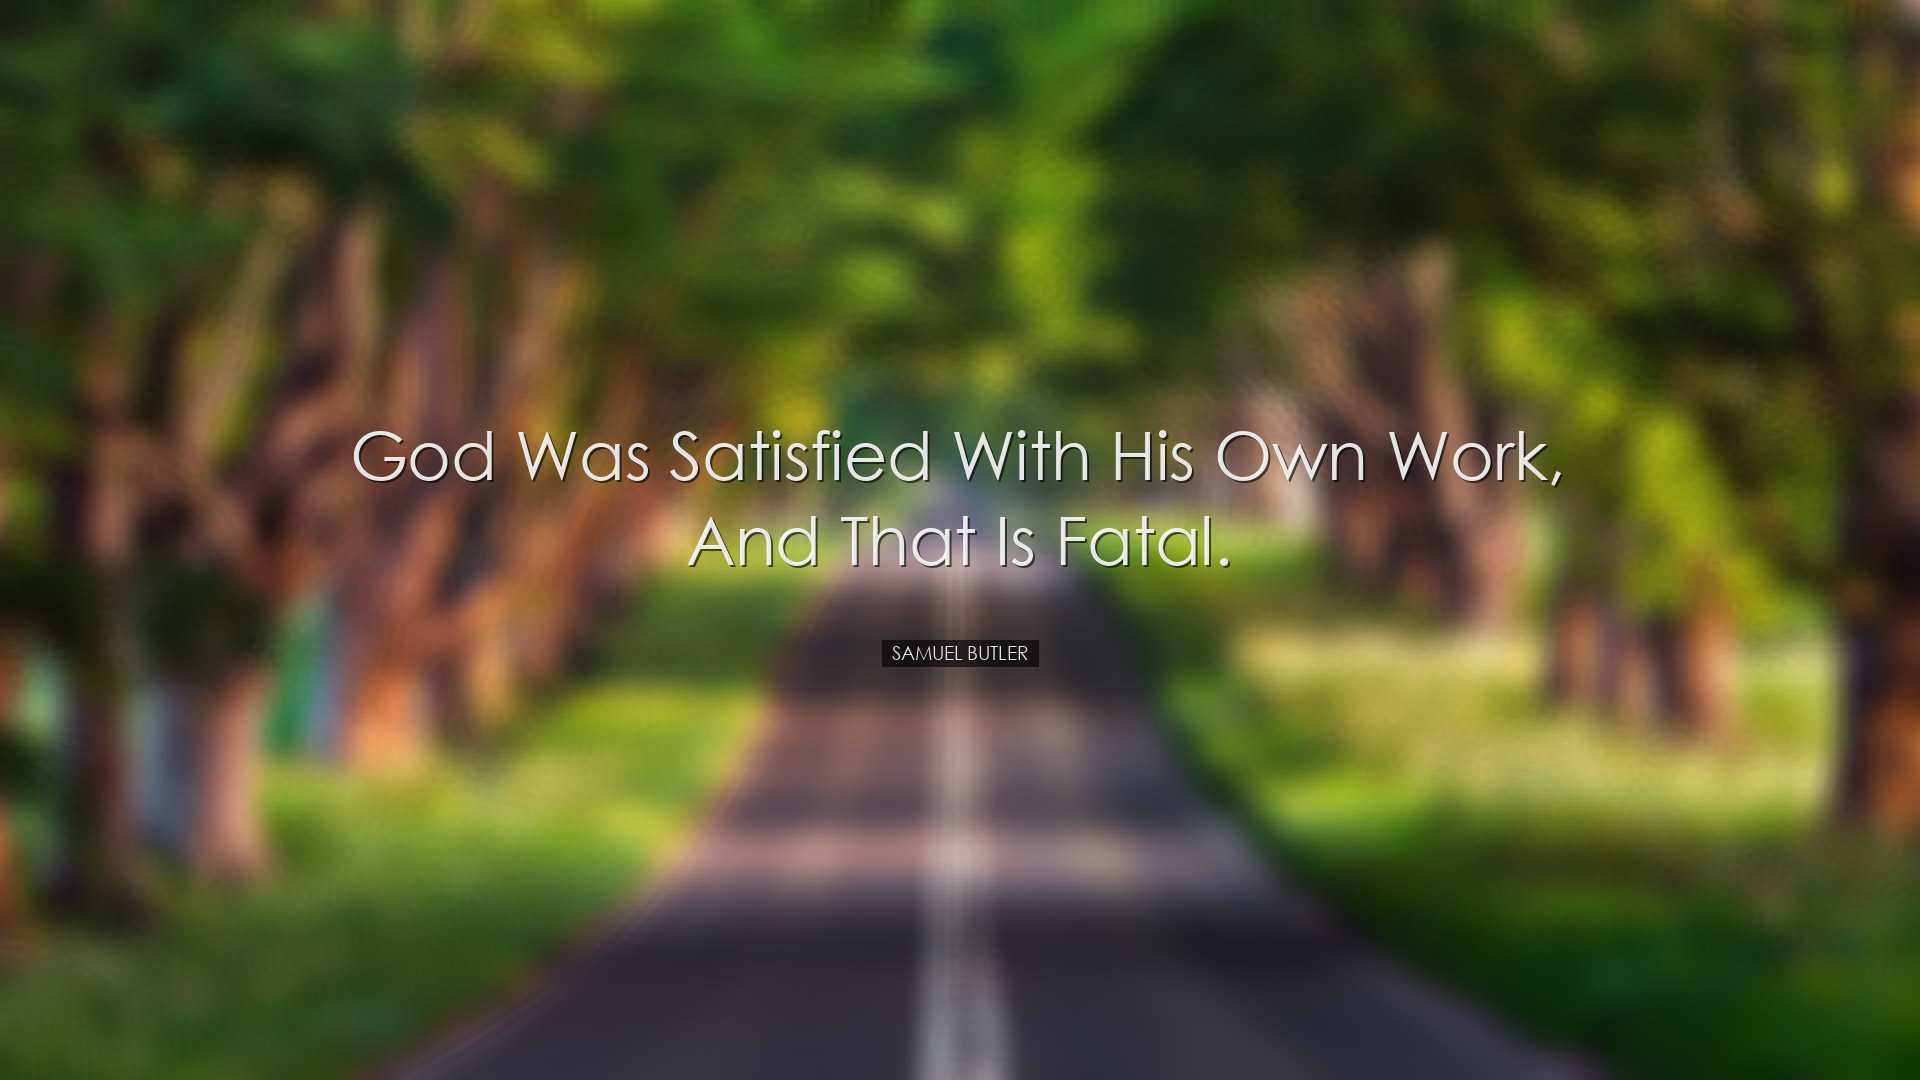 God was satisfied with his own work, and that is fatal. - Samuel B